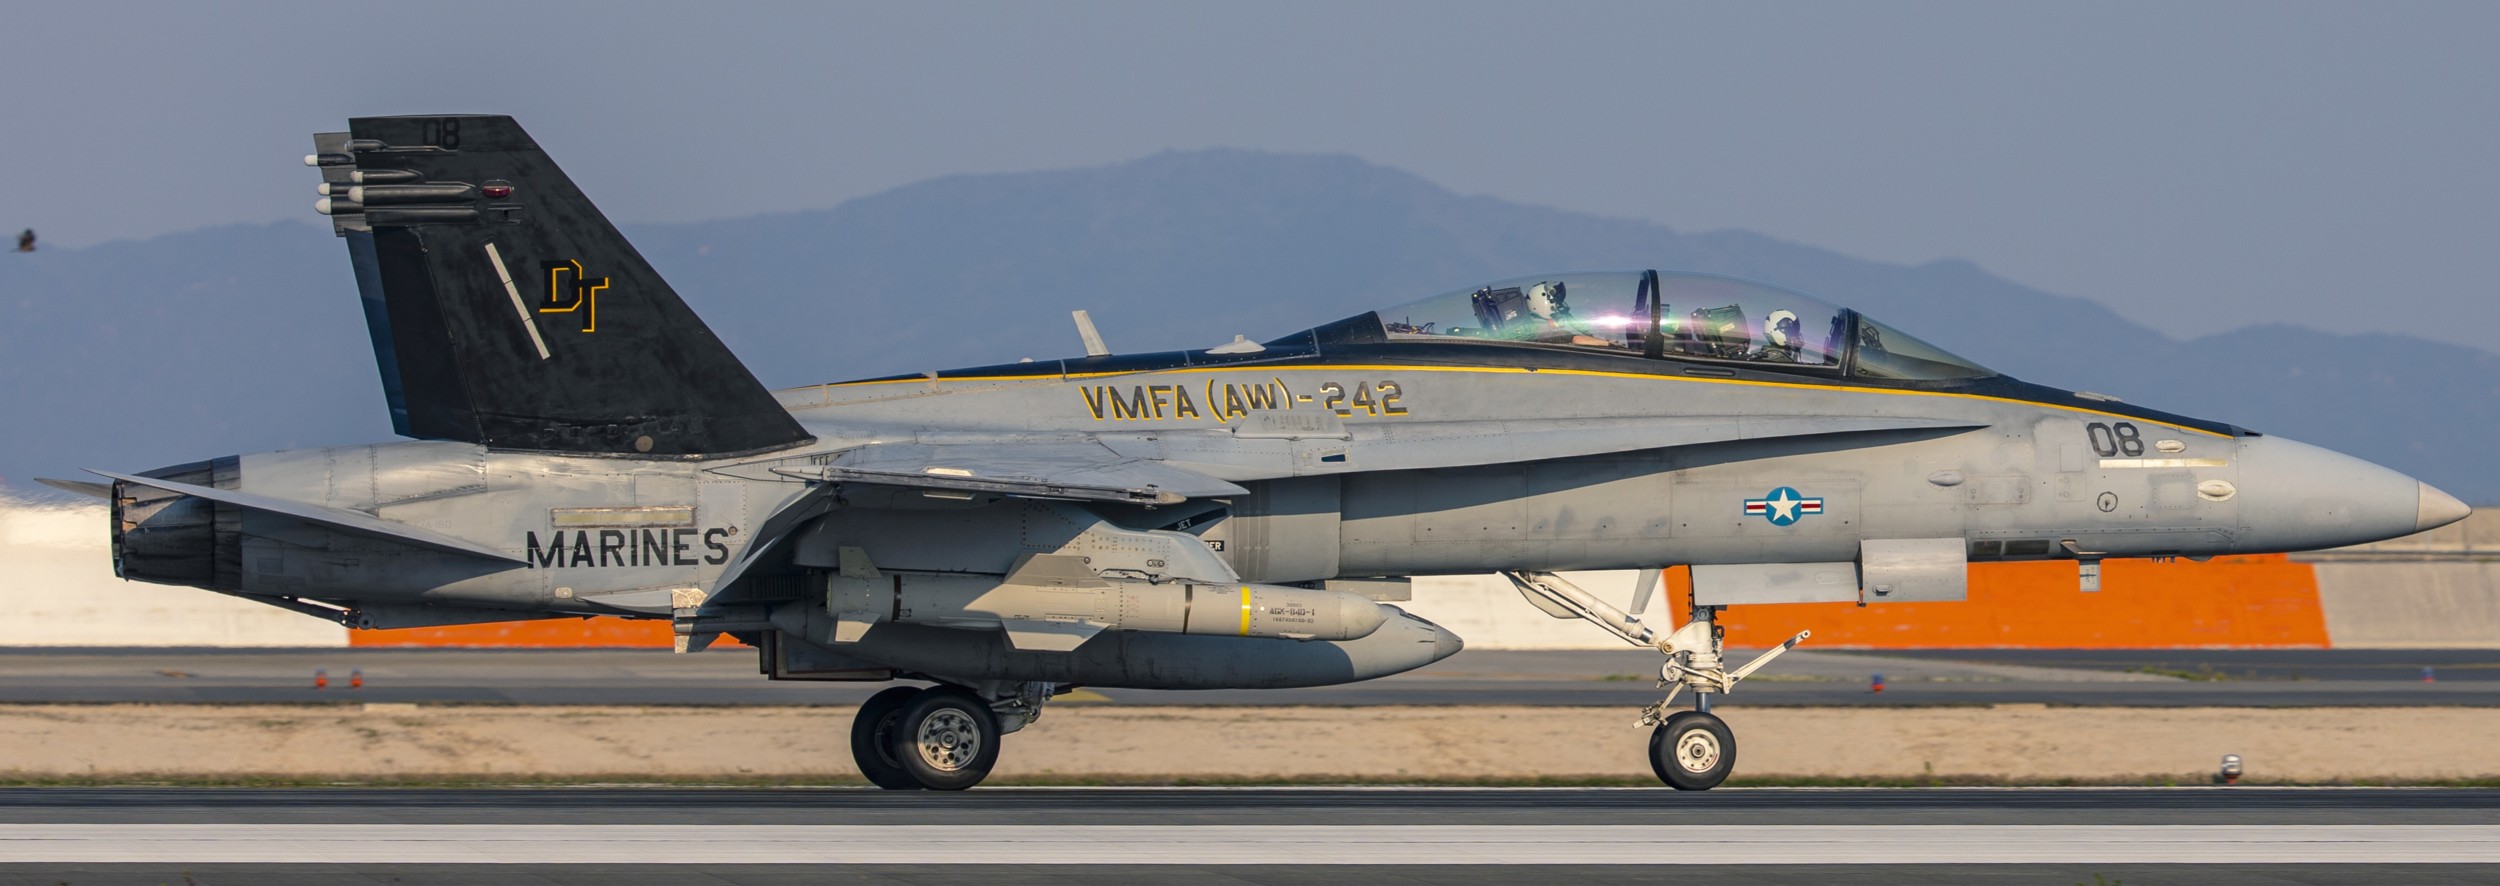 vmfa(aw)-242 bats marine all-weather fighter attack squadron usmc f/a-18d hornet 115 agm-84d harpoon